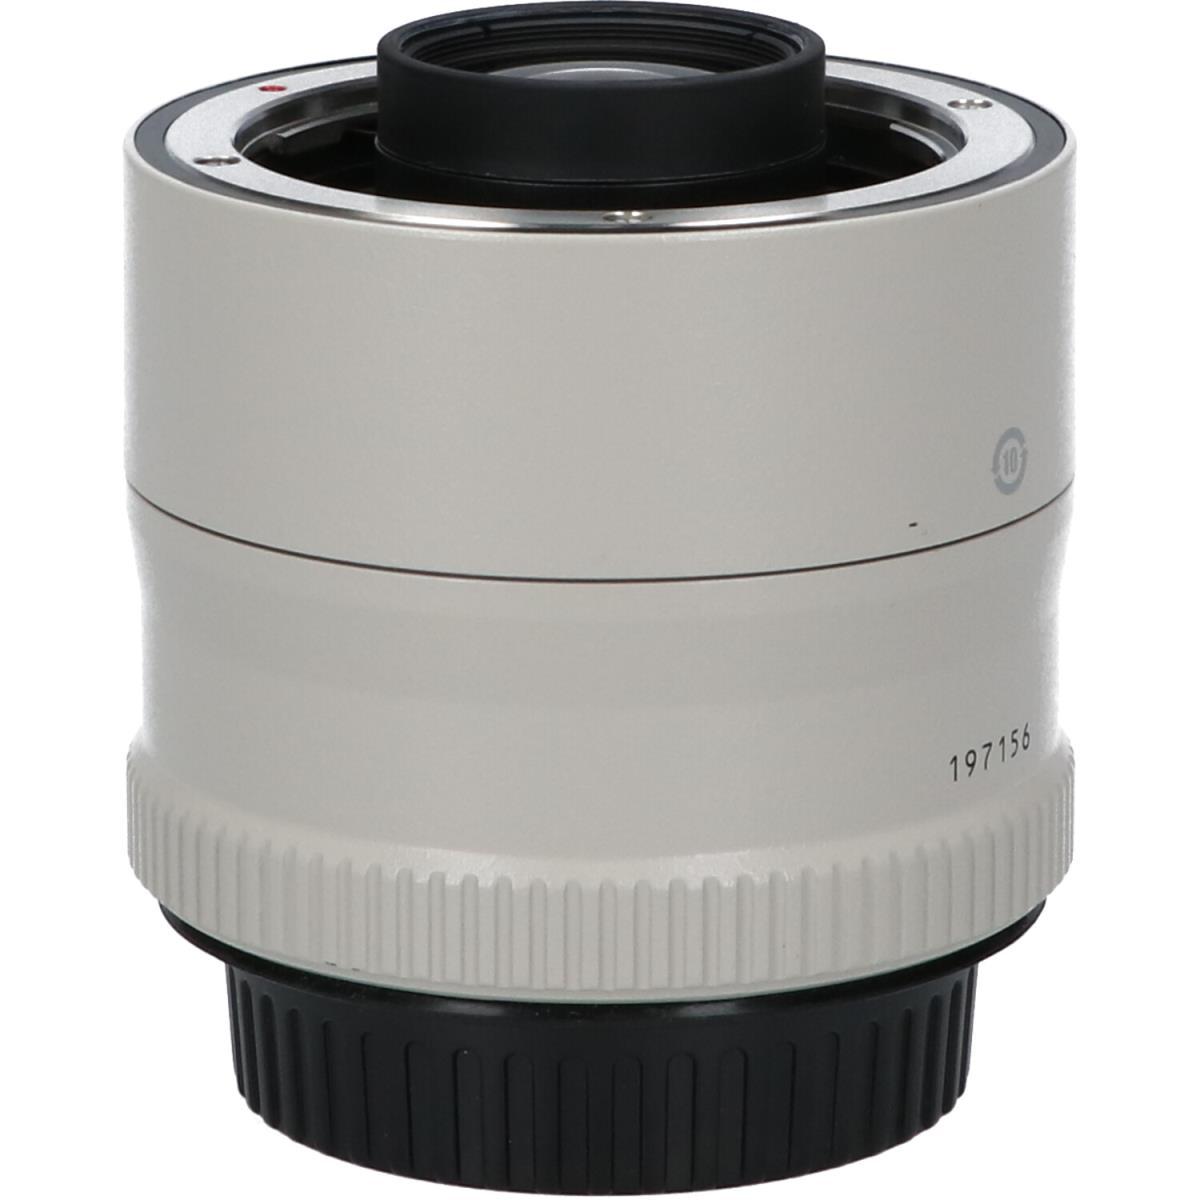 KOMEHYO|CANON EF2XII|CANON|CAMERA|CAMERA ACCESSORIES|OTHERS ...